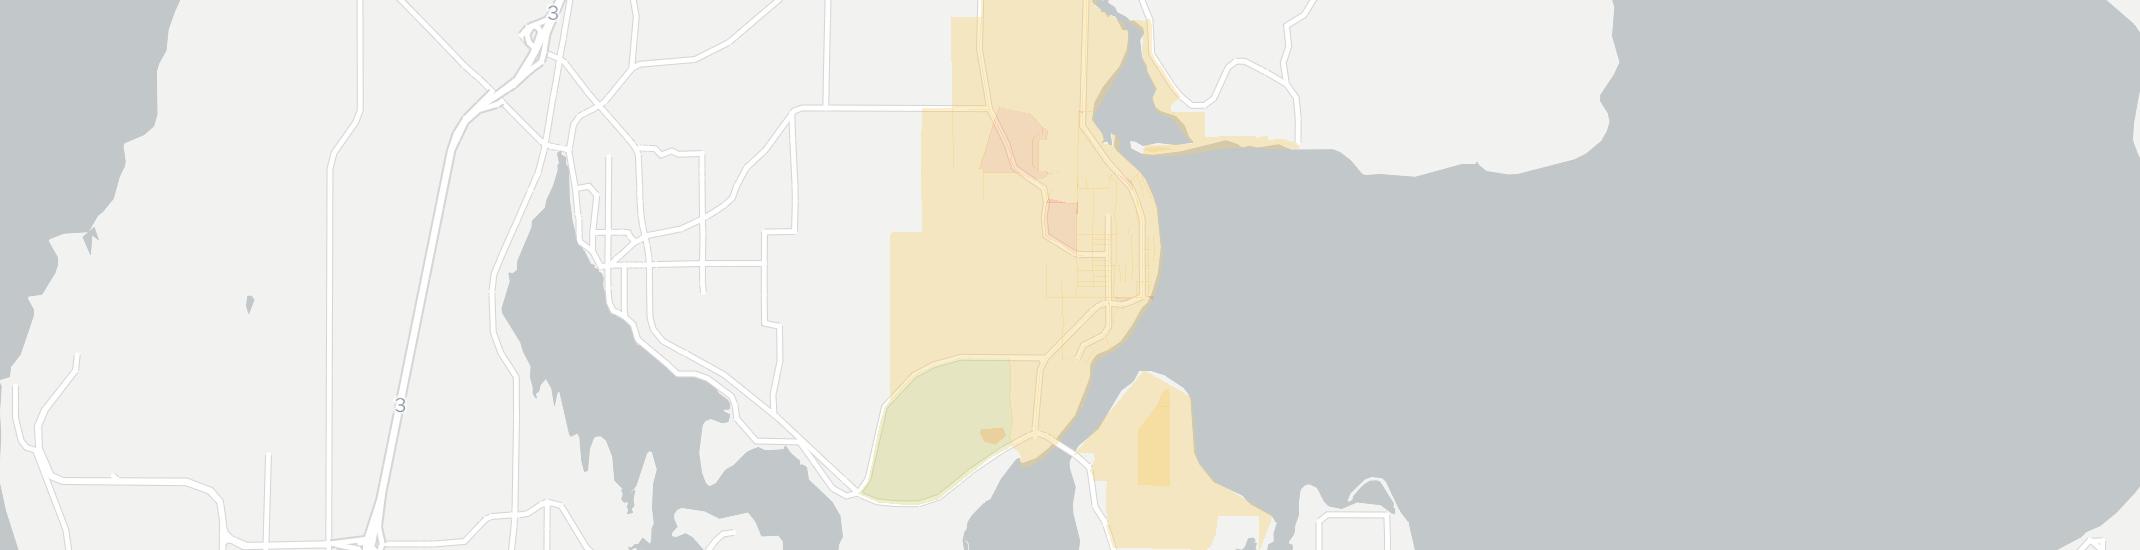 Suquamish Internet Competition Map. Click for interactive map.